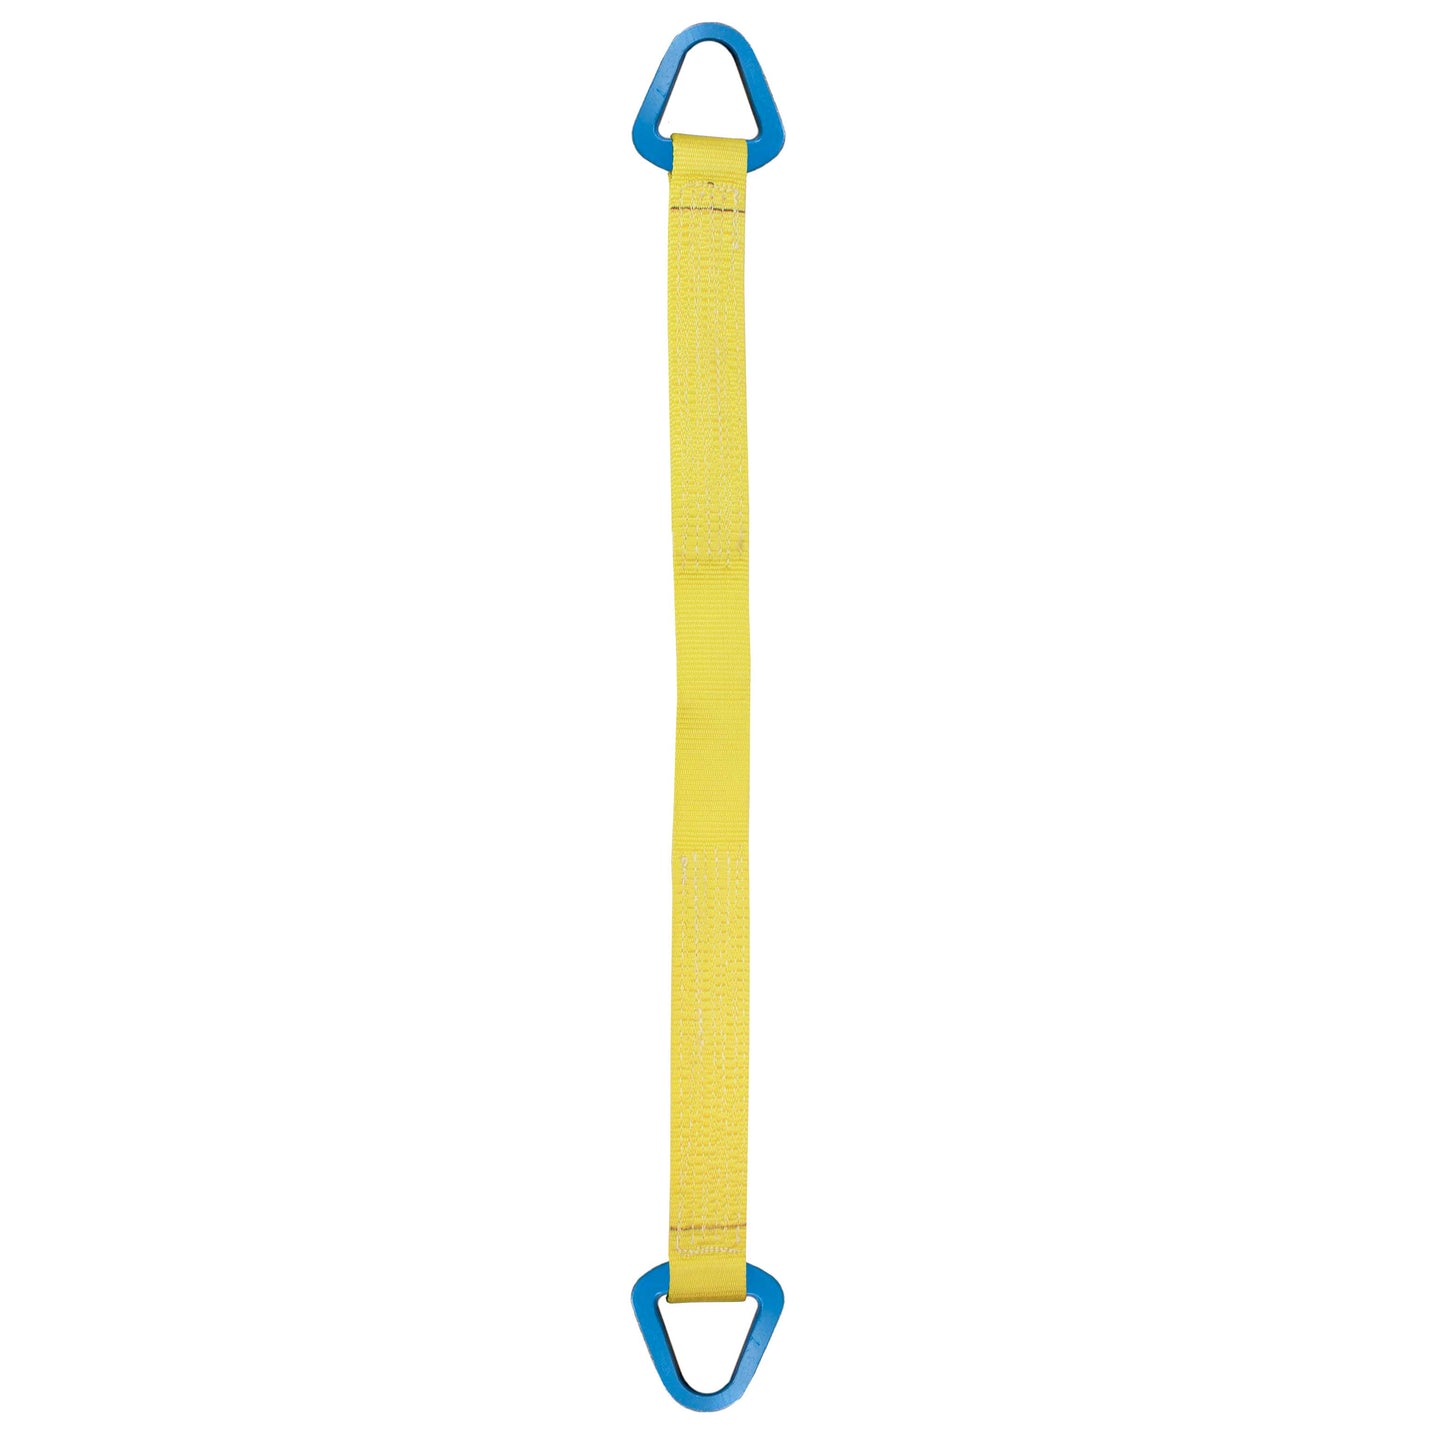 Nylon Lifting Sling Triangle 12 inch x 20 foot 2ply image 1 of 2